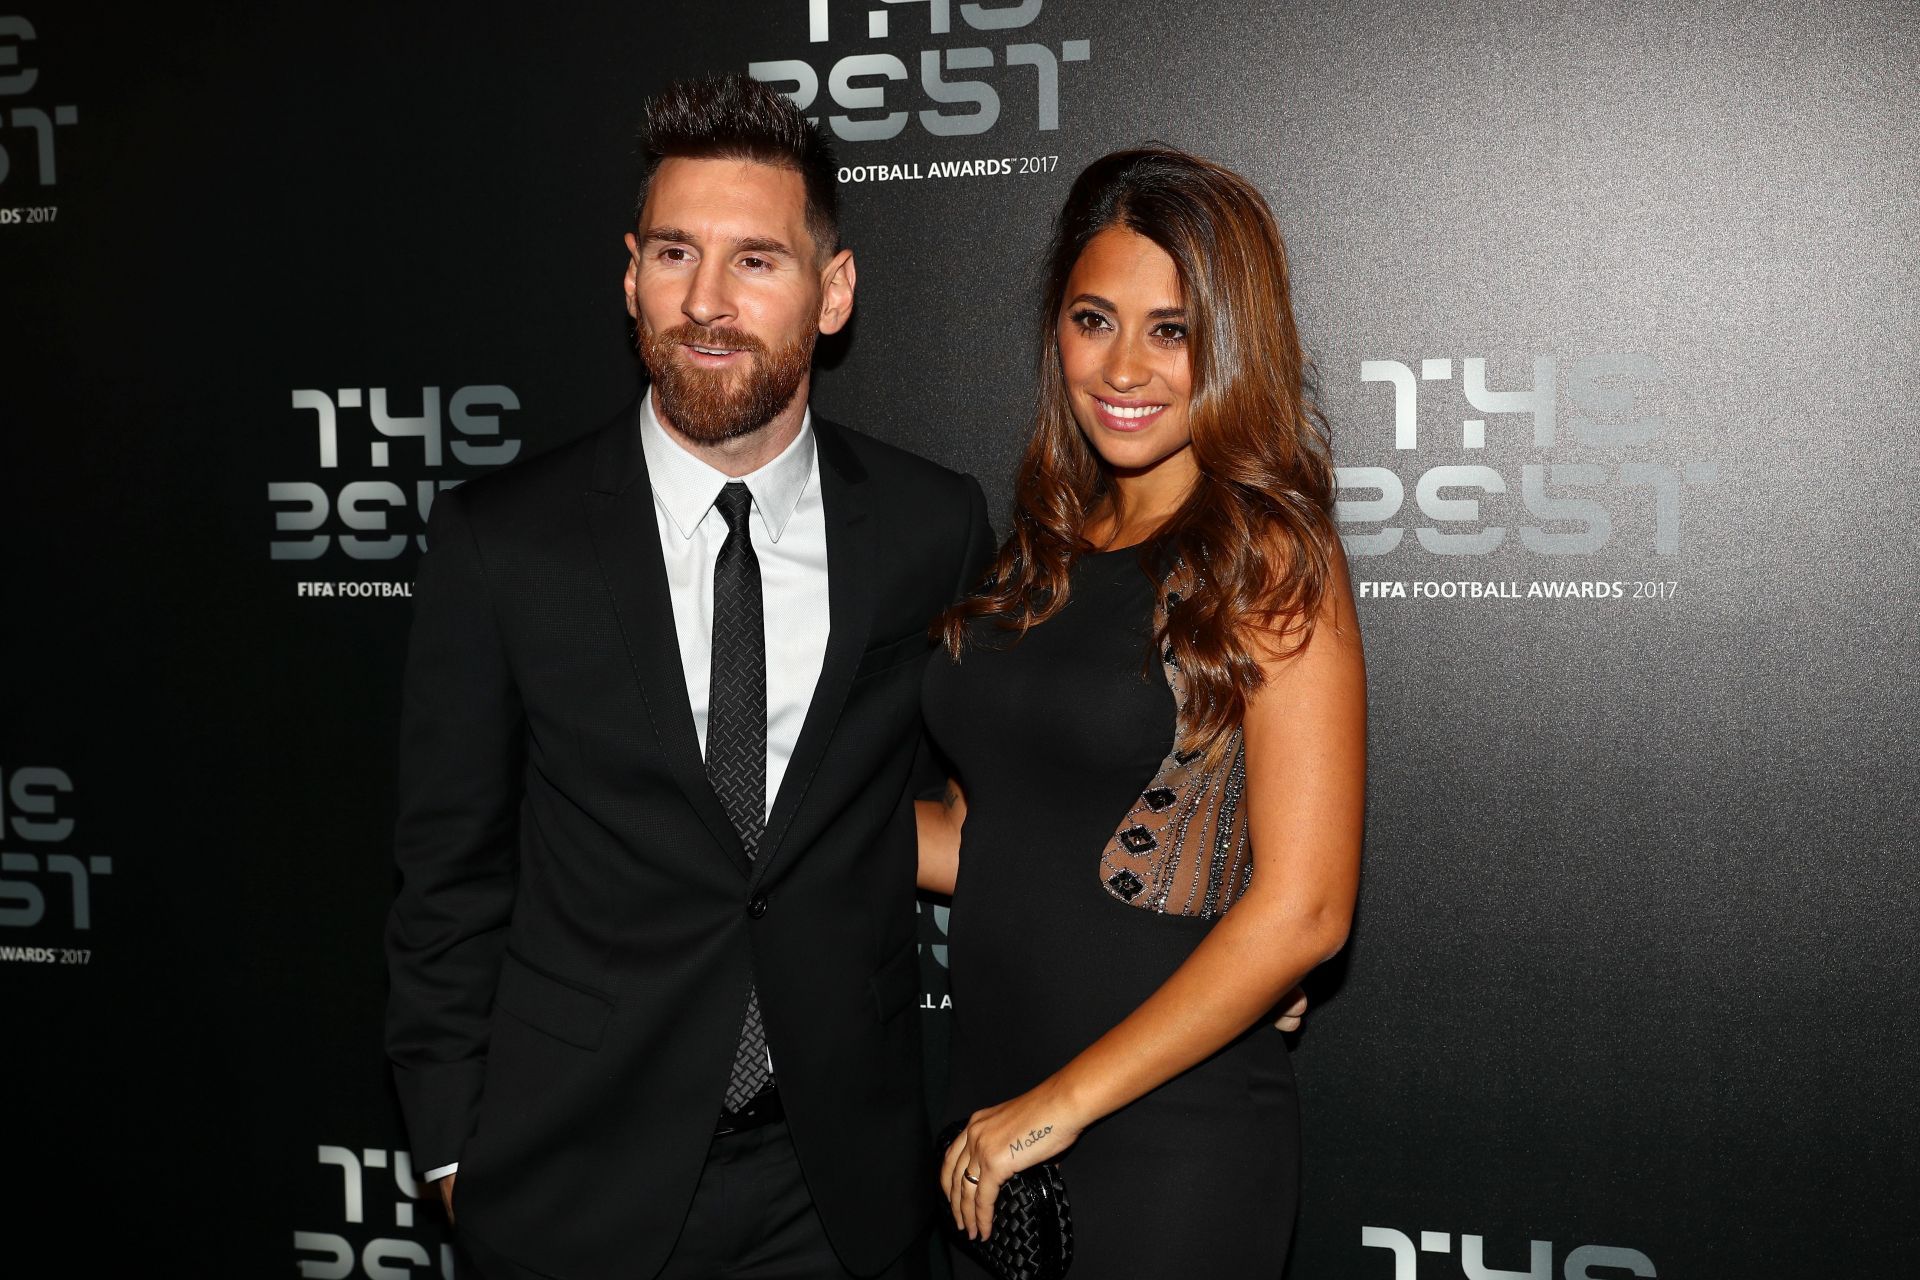 The Best FIFA Football Awards - Green Carpet Arrivals (Photo by Michael Steele/Getty Images)